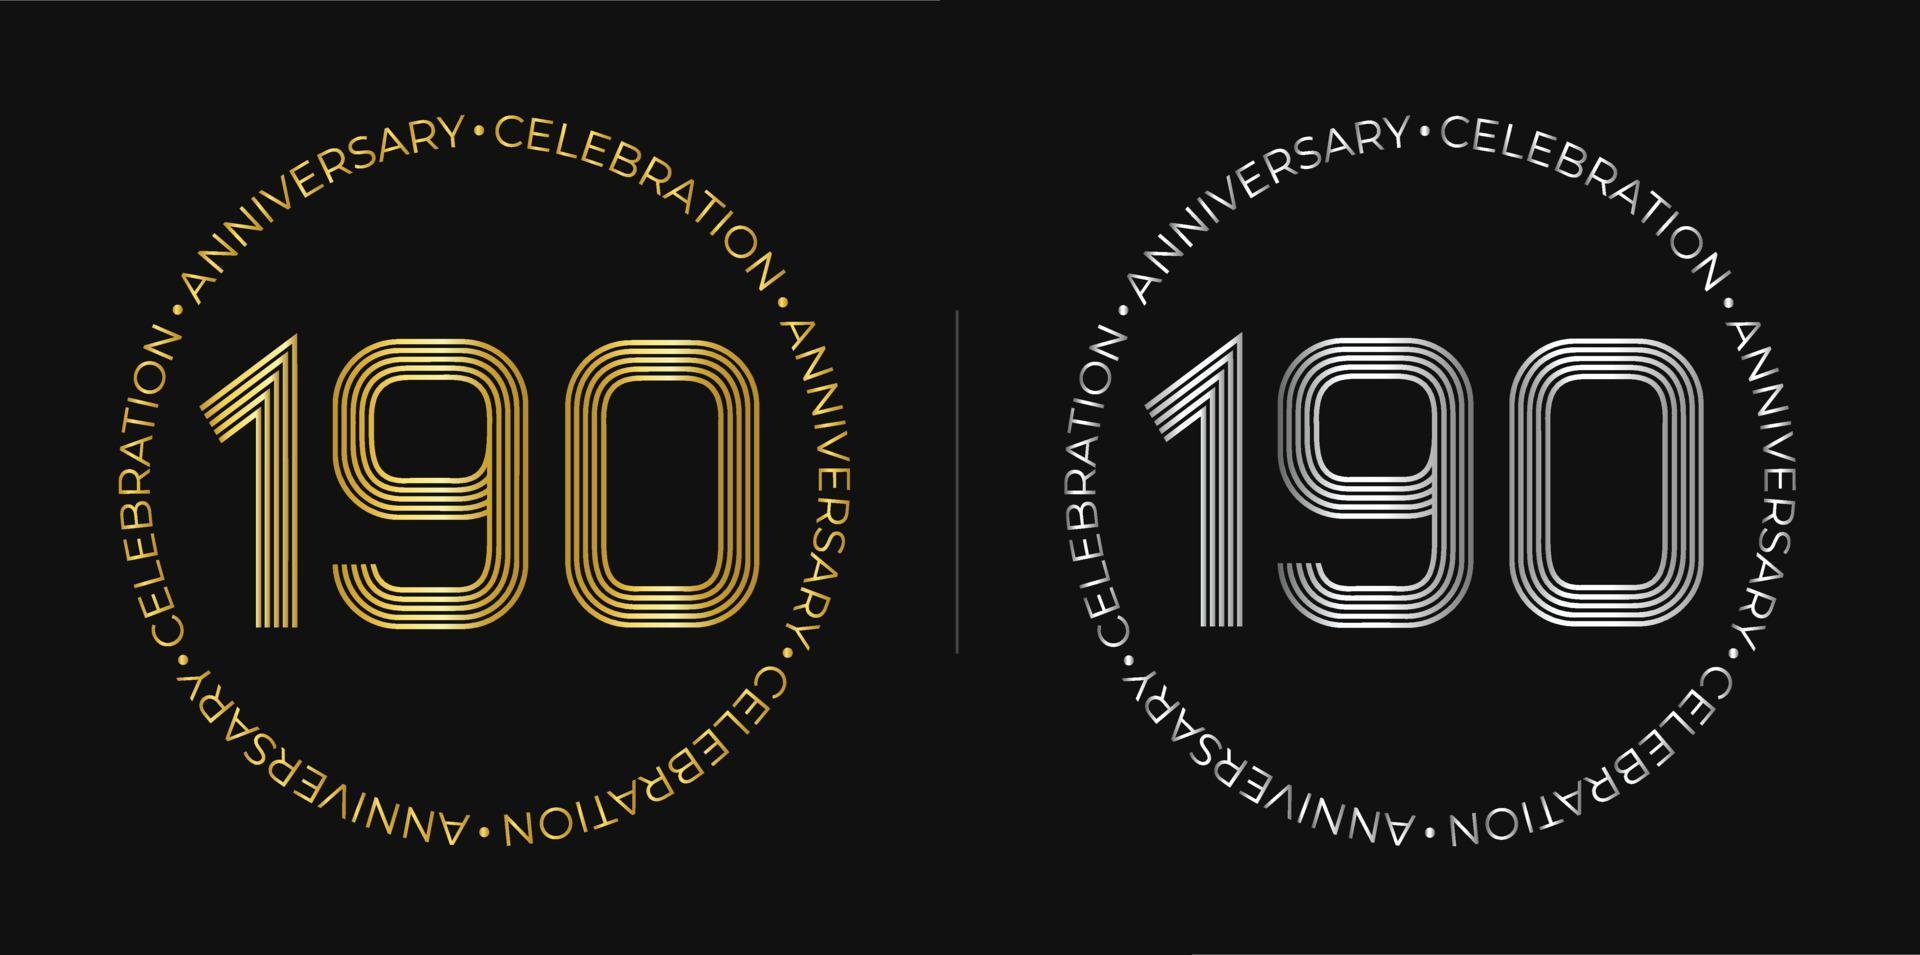 190th birthday. One hundred and ninety years anniversary celebration banner in golden and silver colors. Circular logo with original numbers design in elegant lines. vector